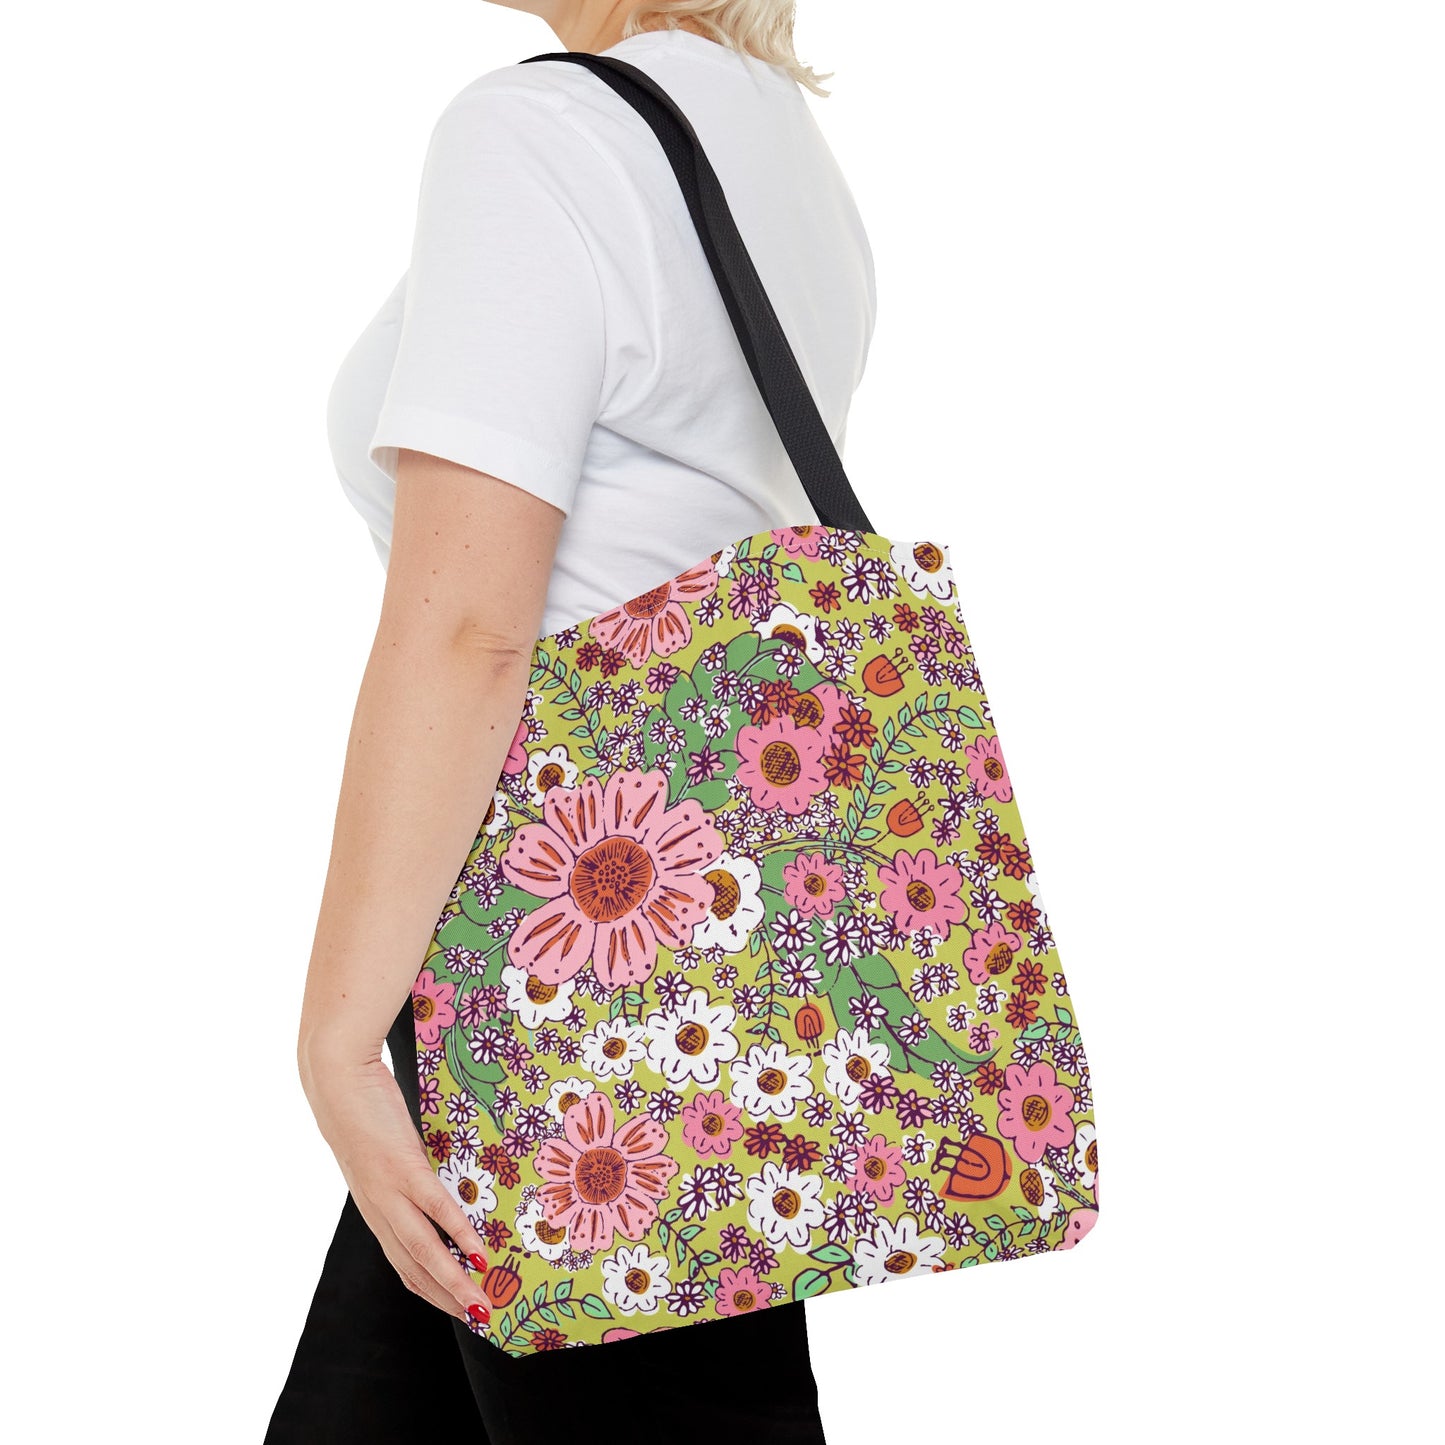 Cheerful Watercolor Flowers on Bright Green Tote Bag